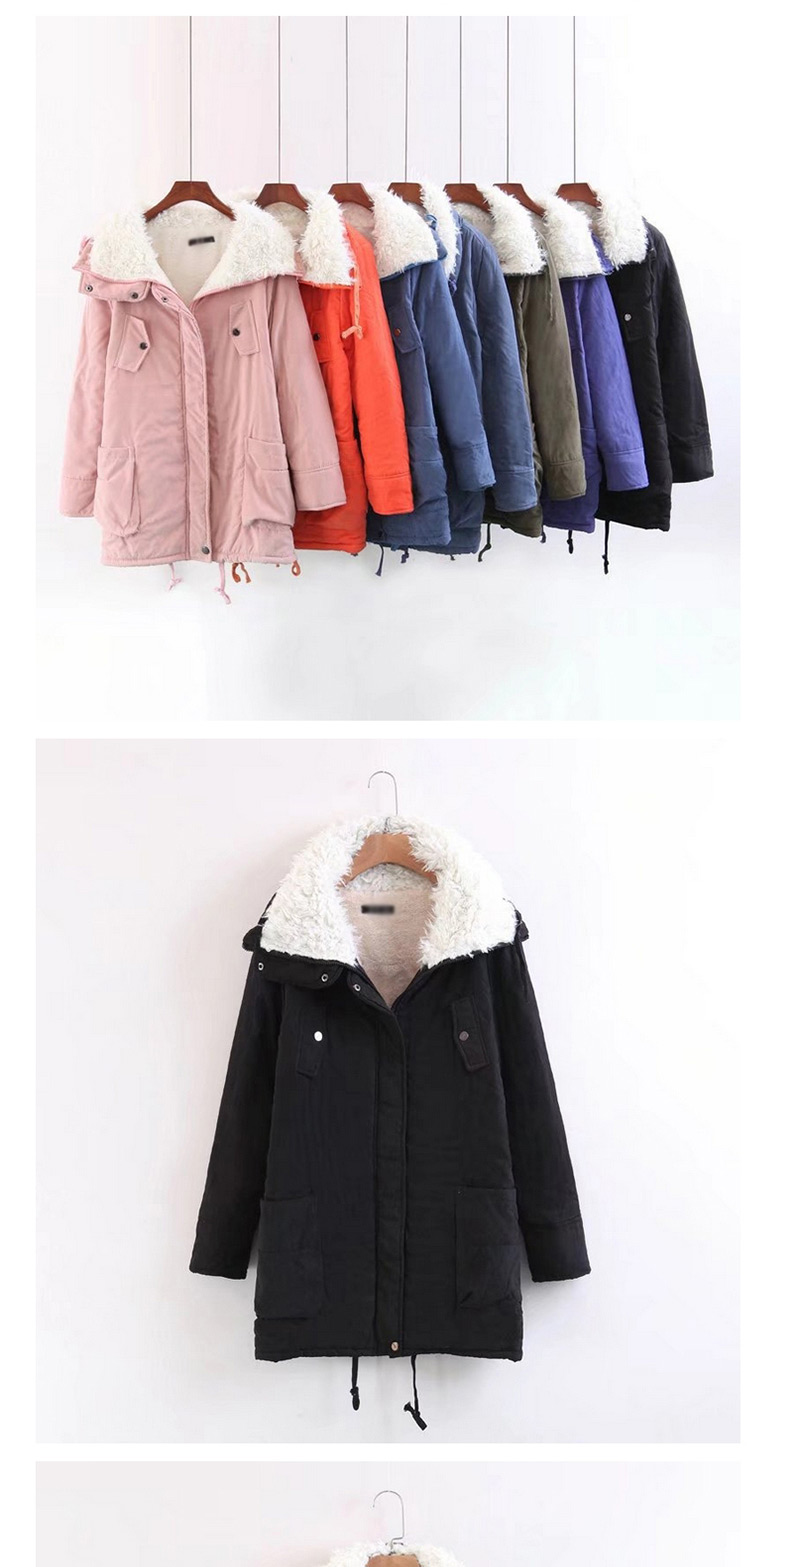 Trendy Orange Pure Color Decorated Cotton-padded Clothes,Coat-Jacket